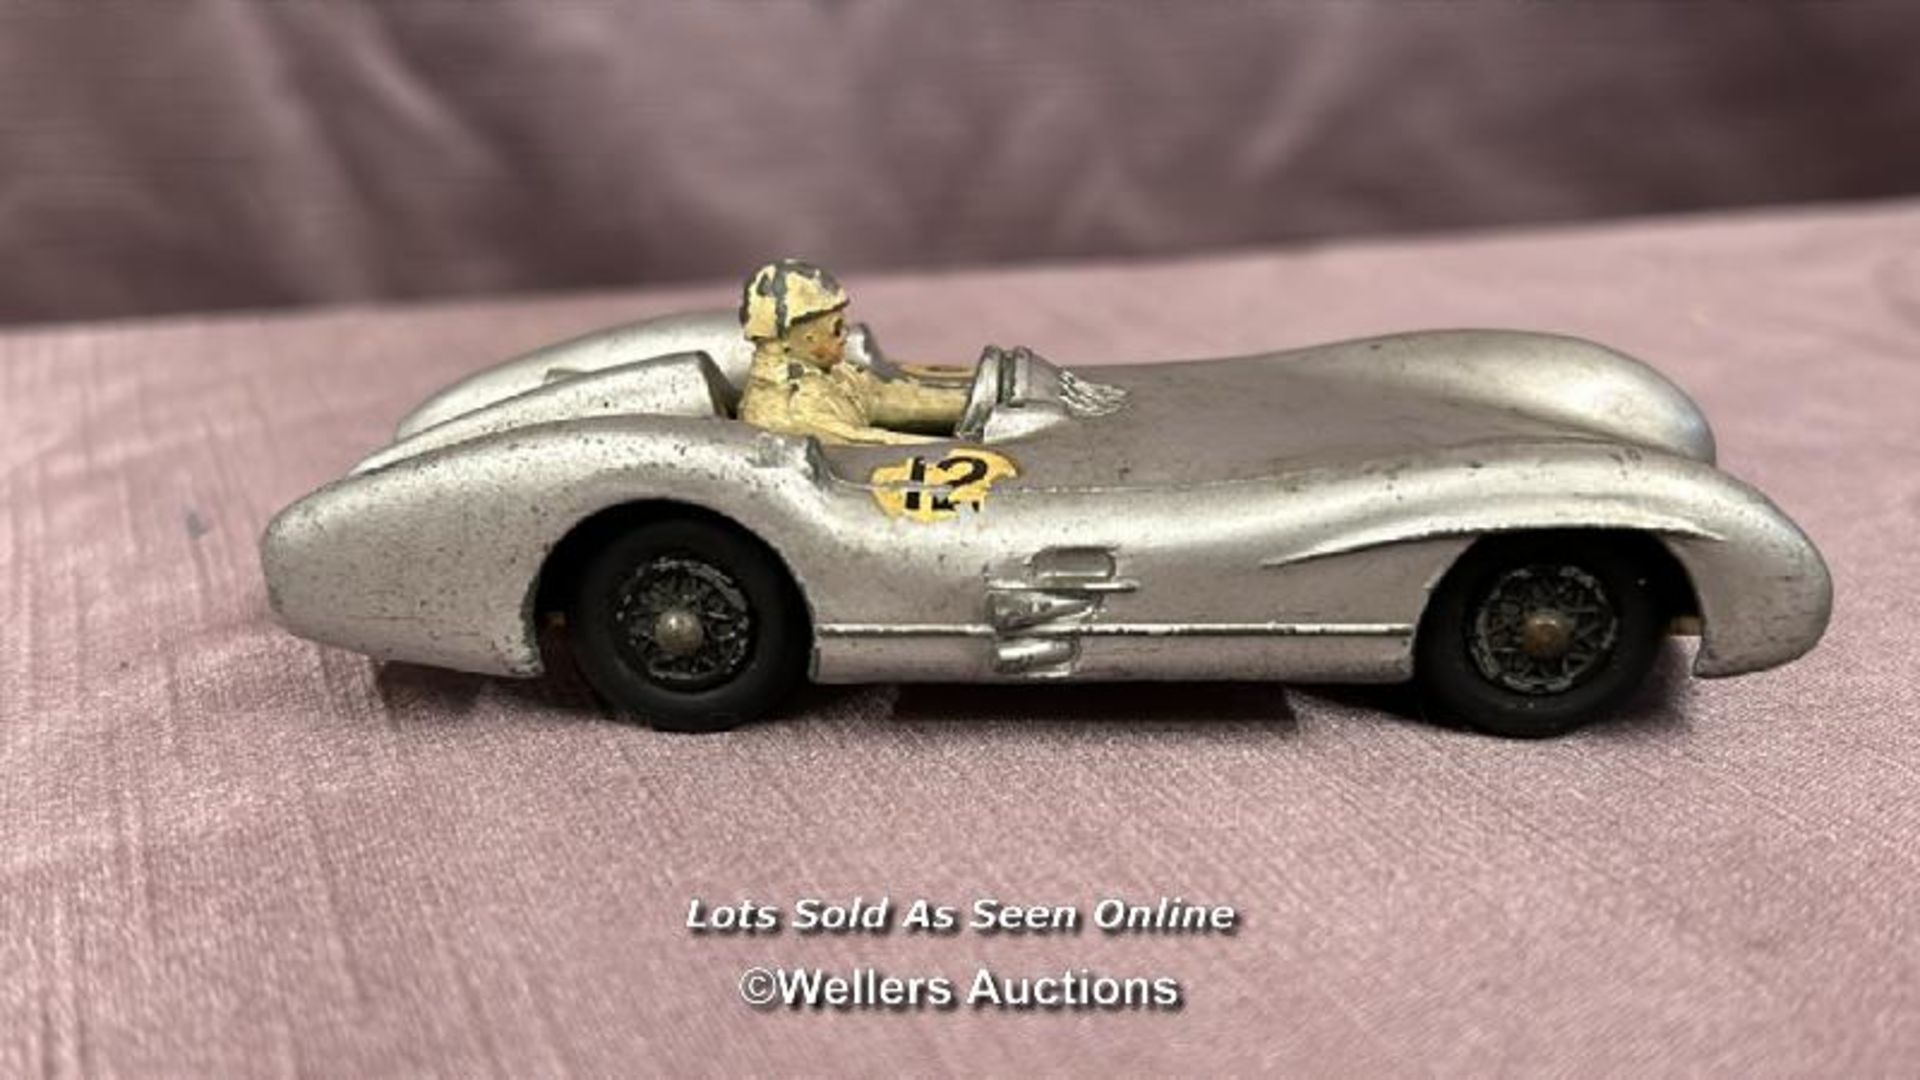 THE CRESCENT TOY COMPANY DIE CAST MERCEDES BENZ 2.5LT GRAND PRIX RACING CAR - Image 3 of 5